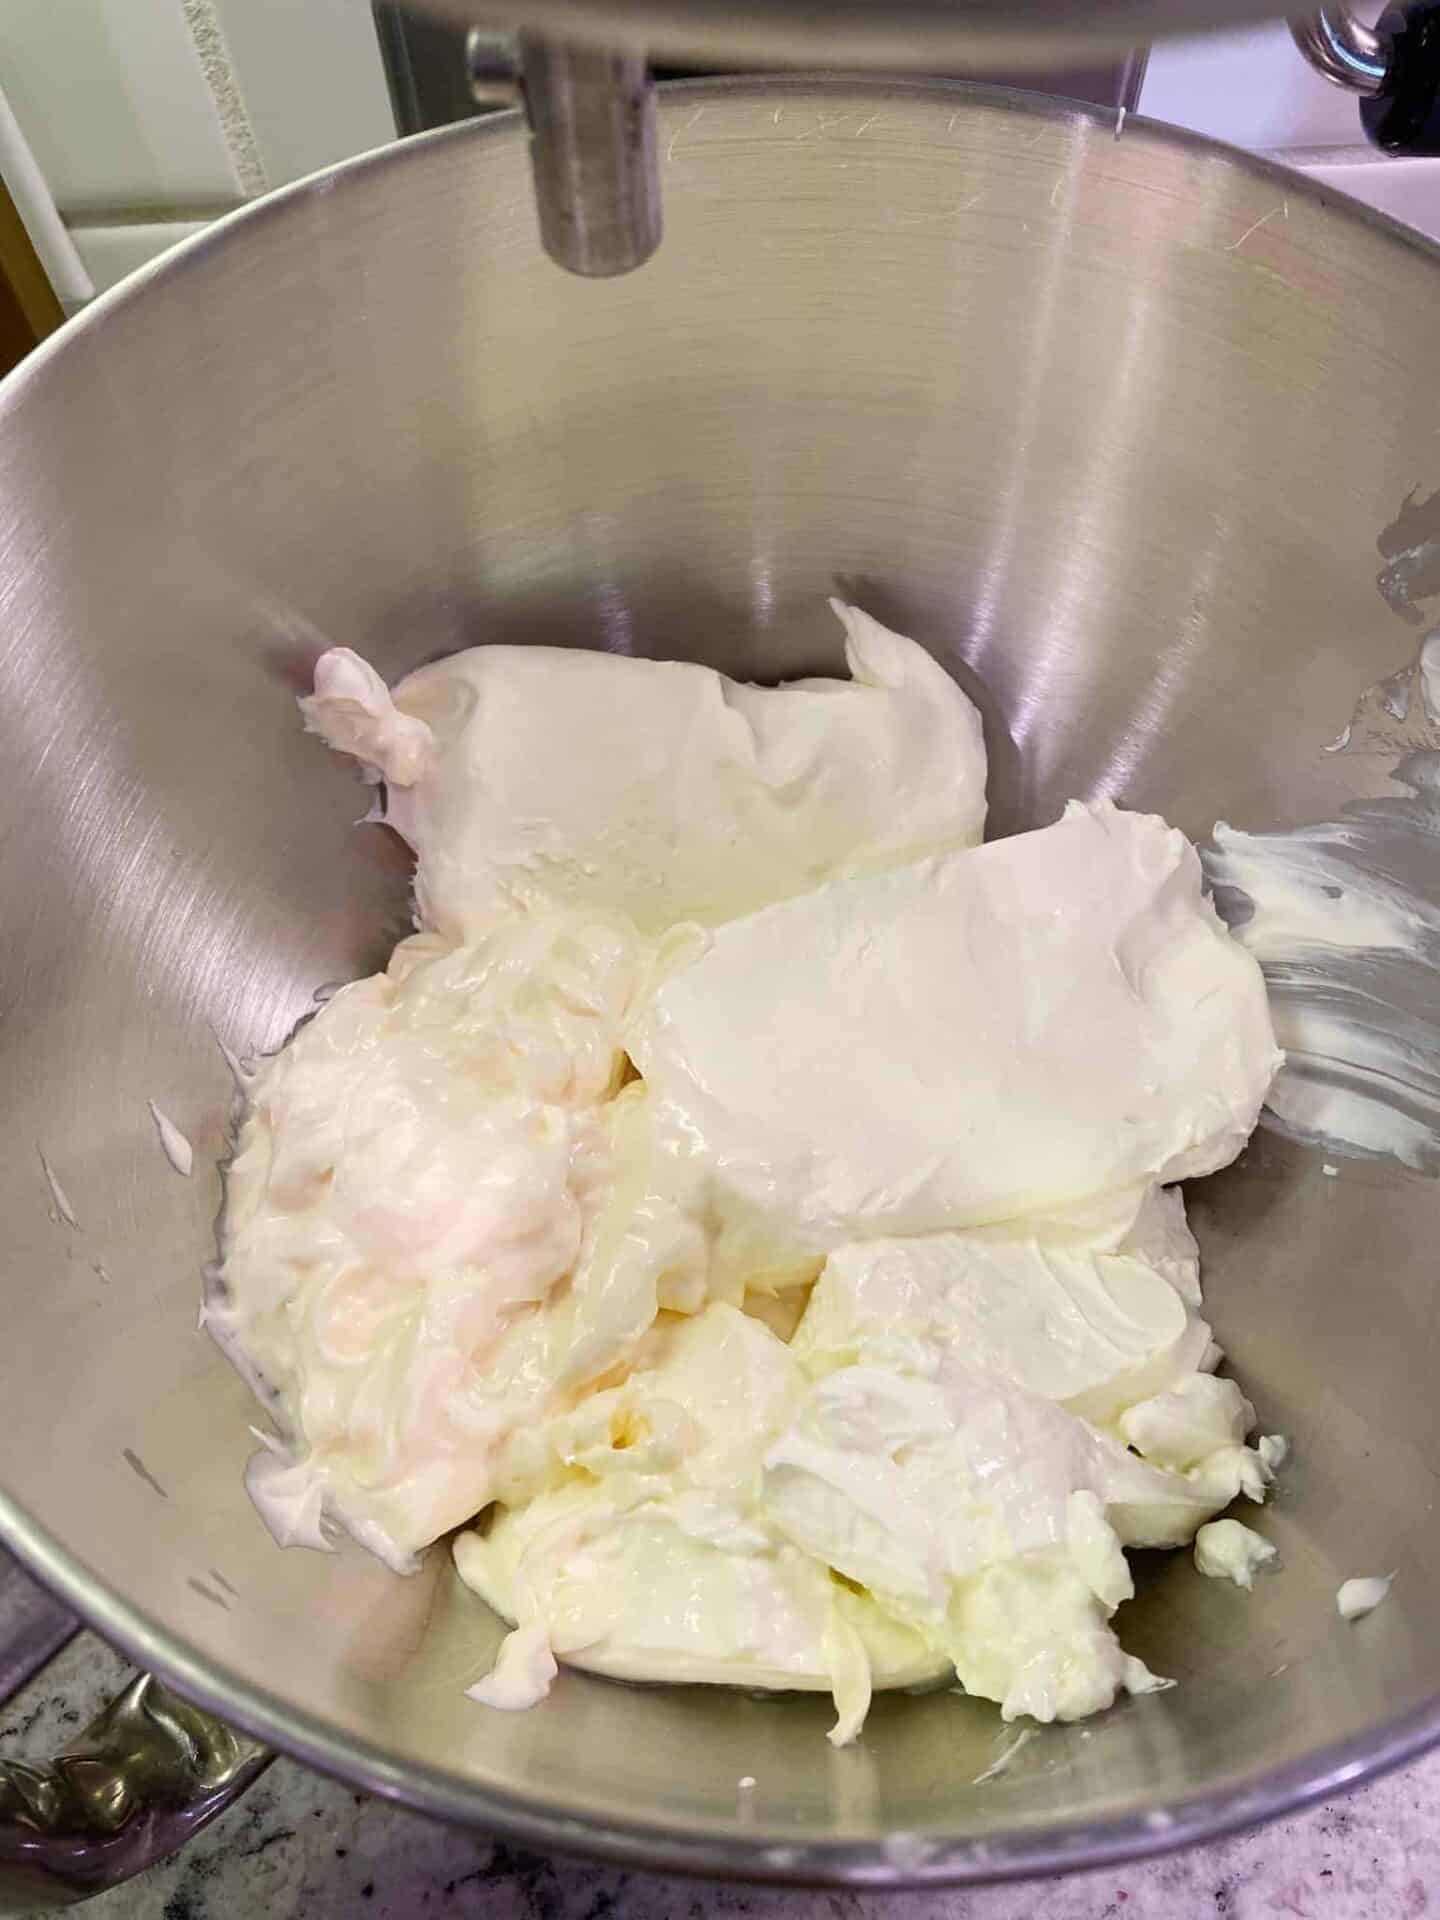 cream-cheese-mayonnaise-and-sour-cream-in-standing-mixer